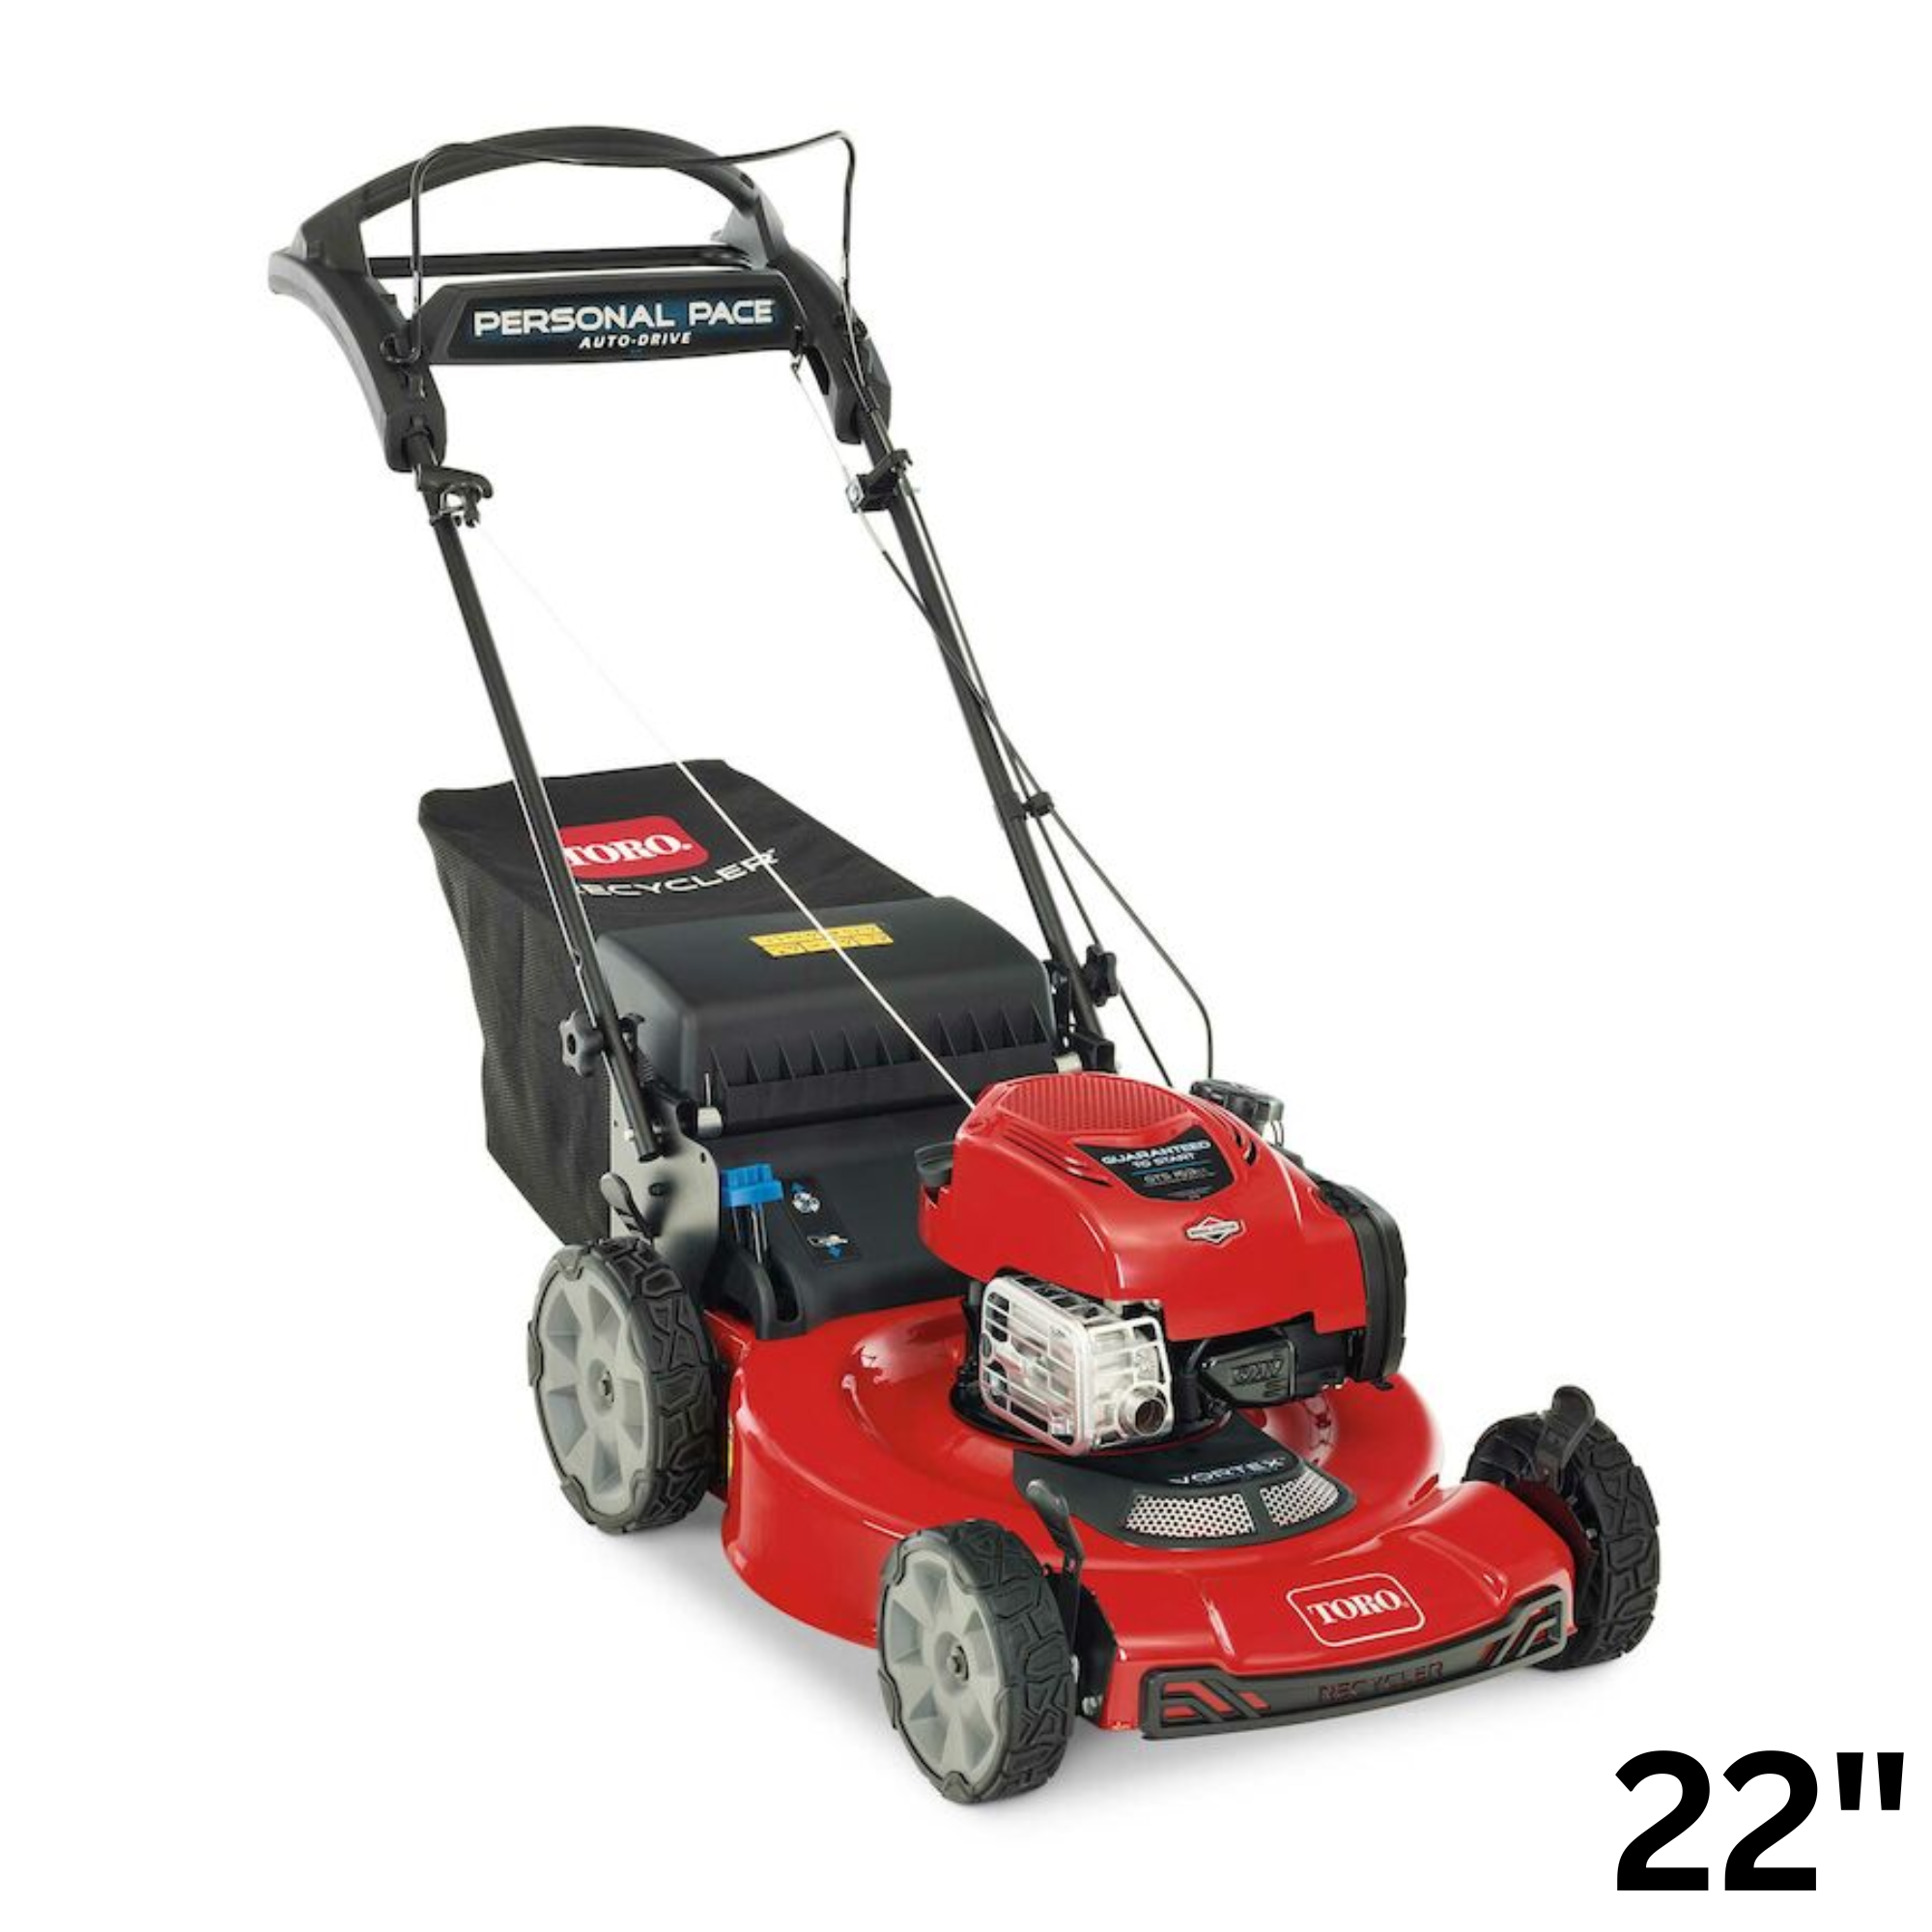 Toro Recycler (22") Personal Pace Auto-Drive Mower | 21462